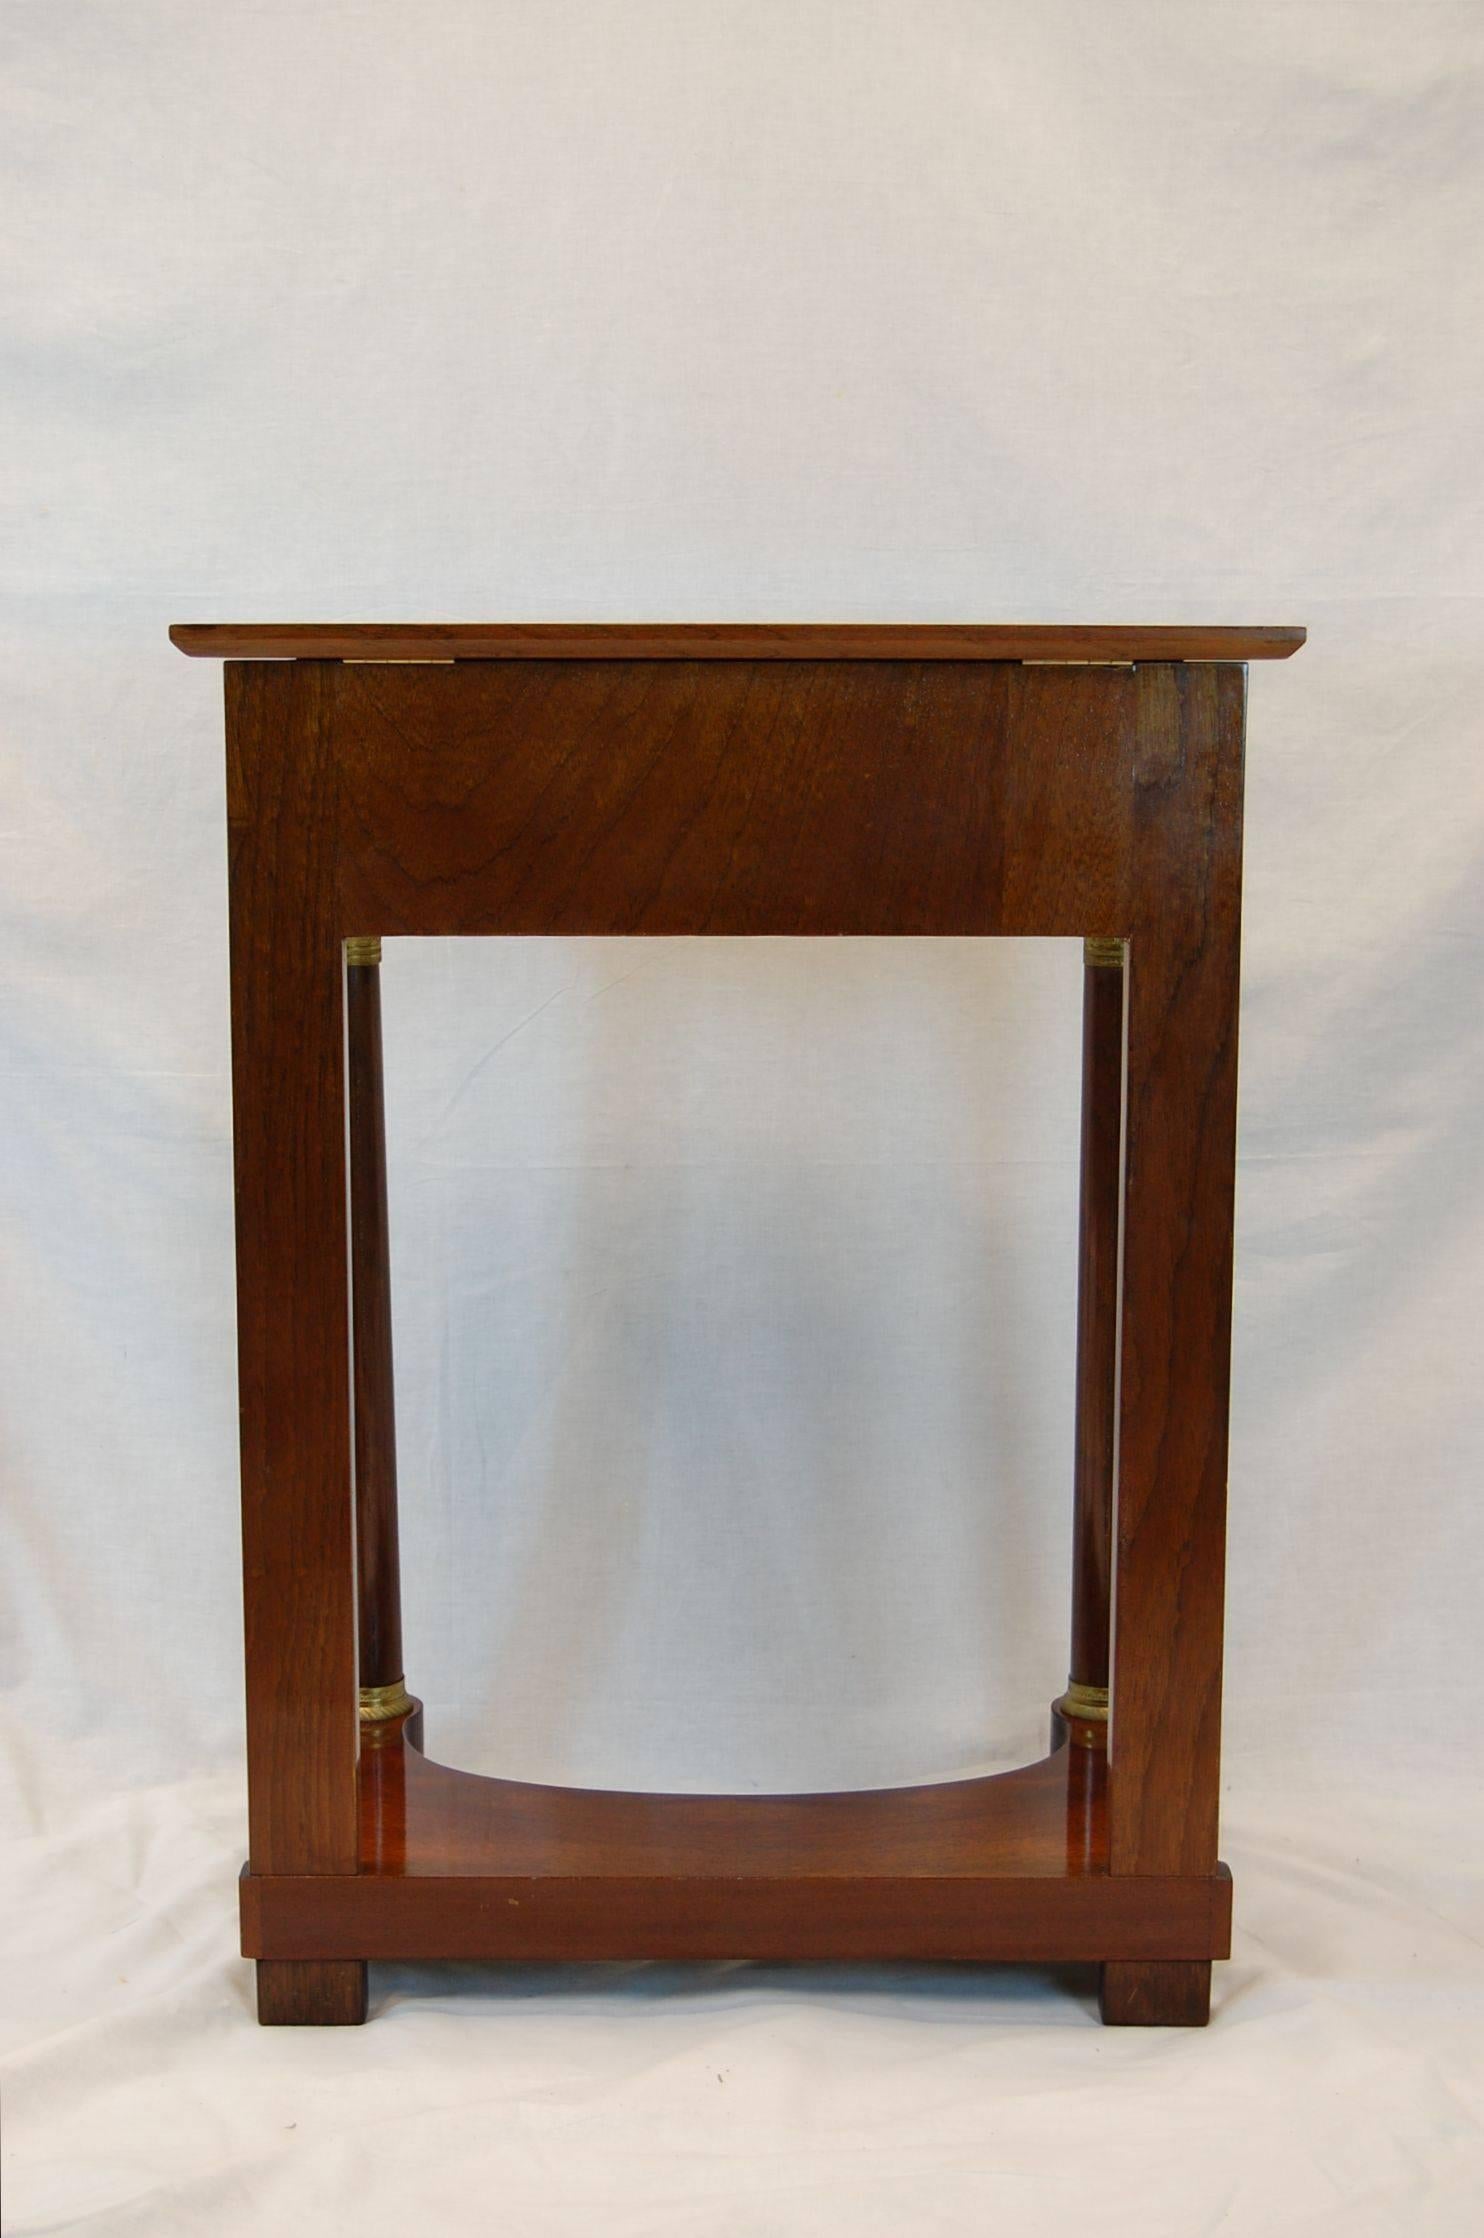 Hand-Crafted Empire Mahogany Sewing or Dressing Table with Drawer and Flip-Up Top, circa 1880 For Sale